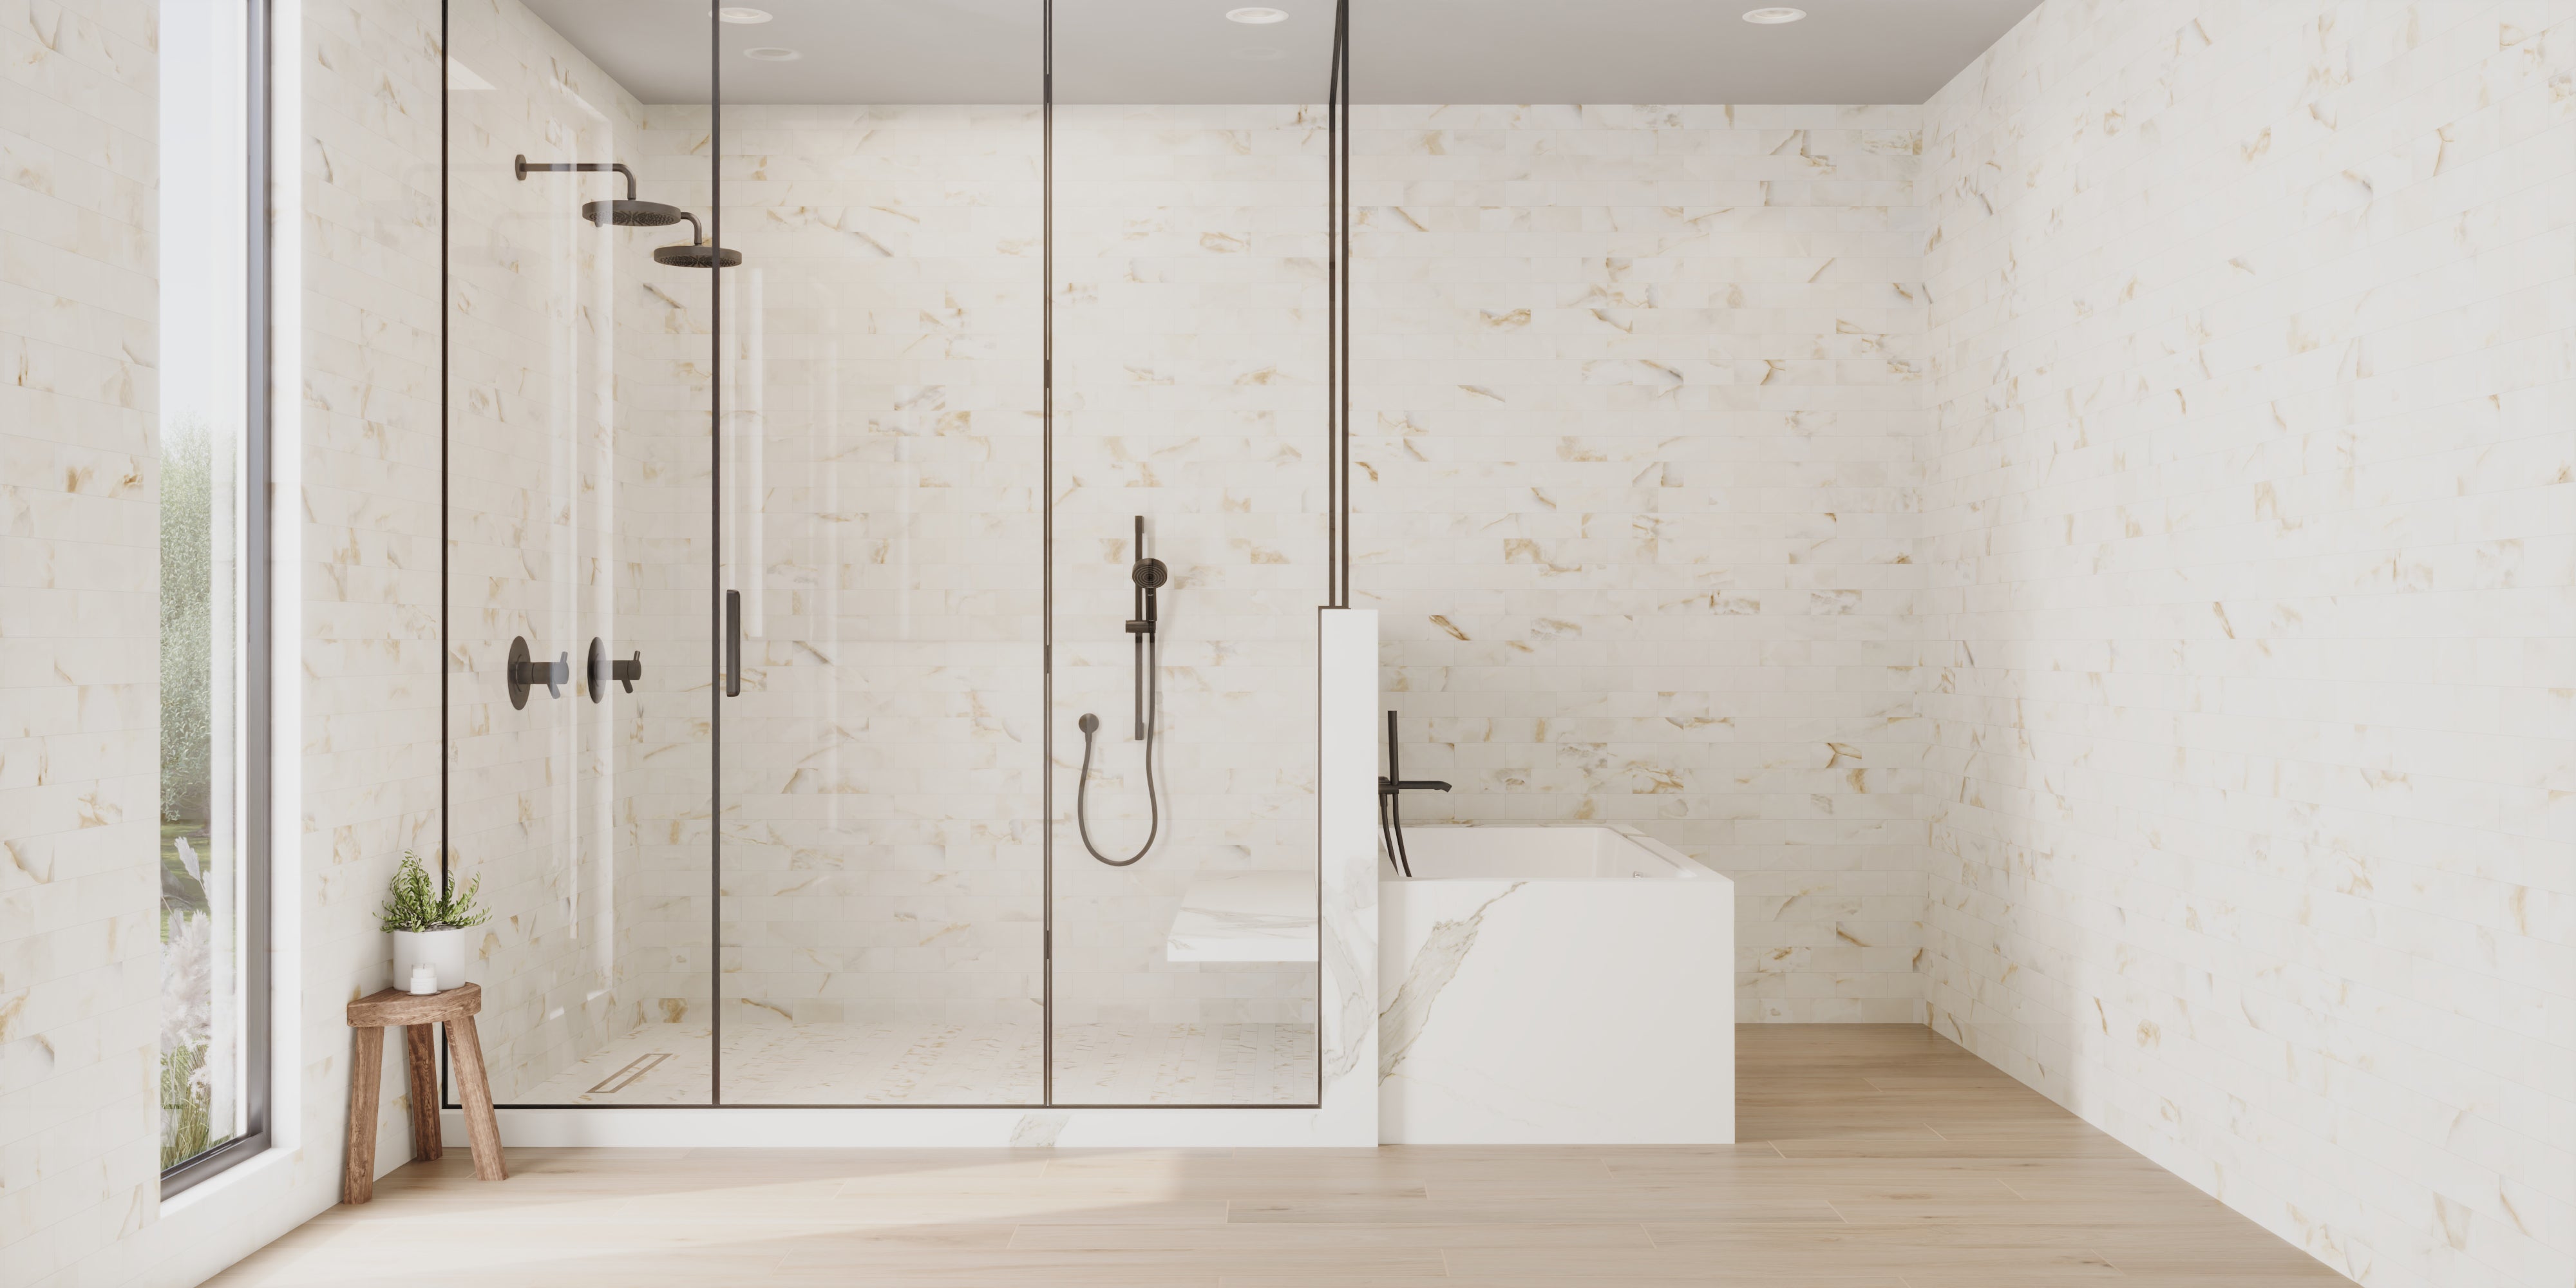 A luxurious bathroom enhanced by the sophisticated charm of 3x6 subway porcelain tiles, reflecting unparalleled elegance and modern design on every wall.